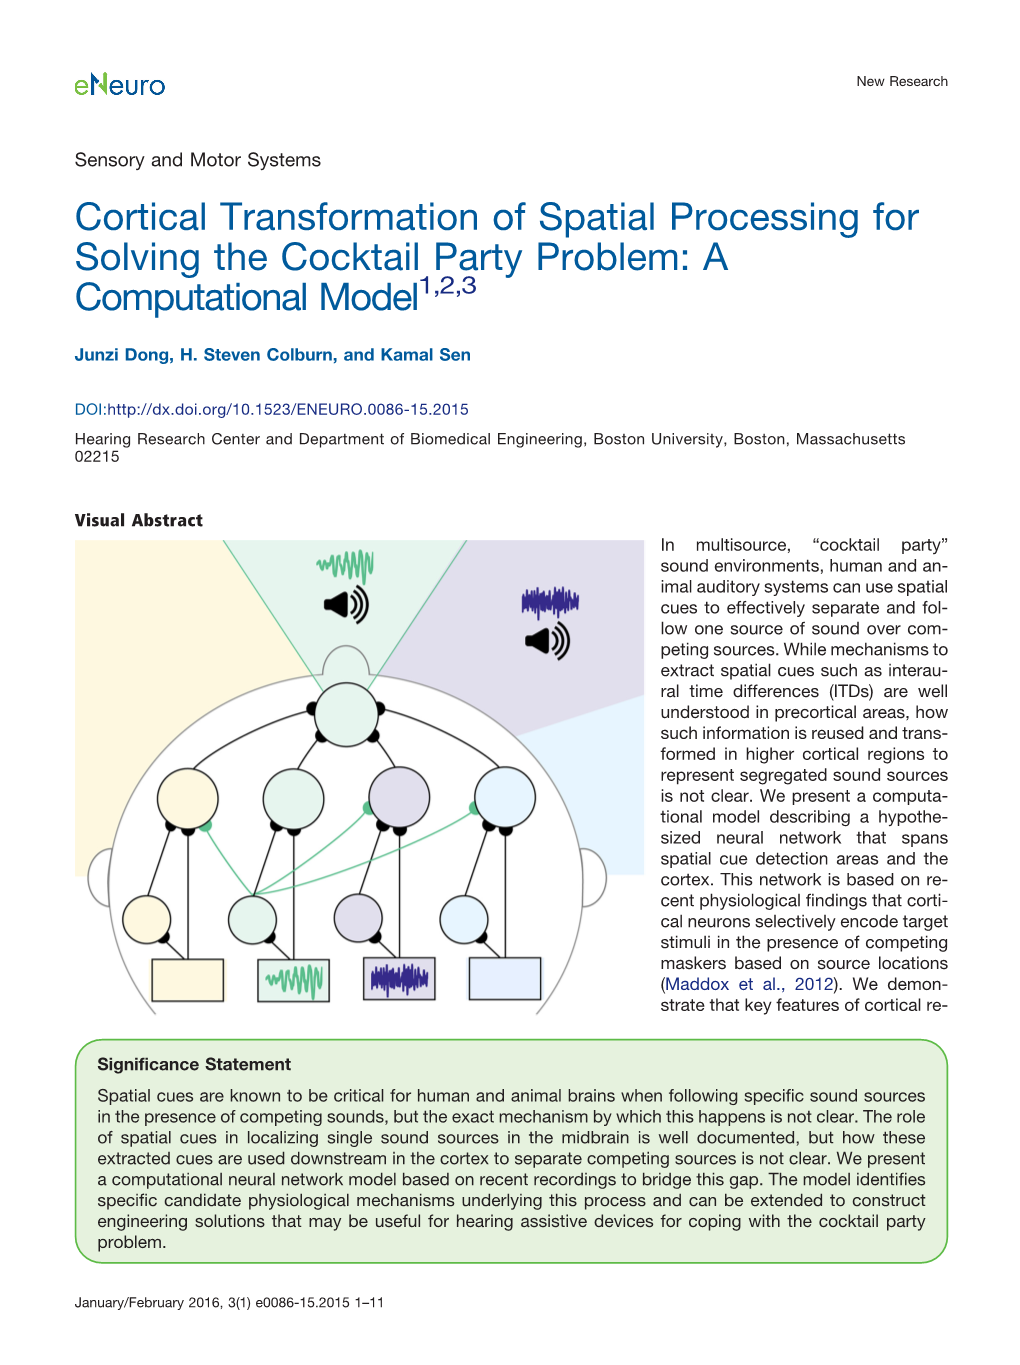 Cortical Transformation of Spatial Processing for Solving the Cocktail Party Problem: a Computational Model1,2,3